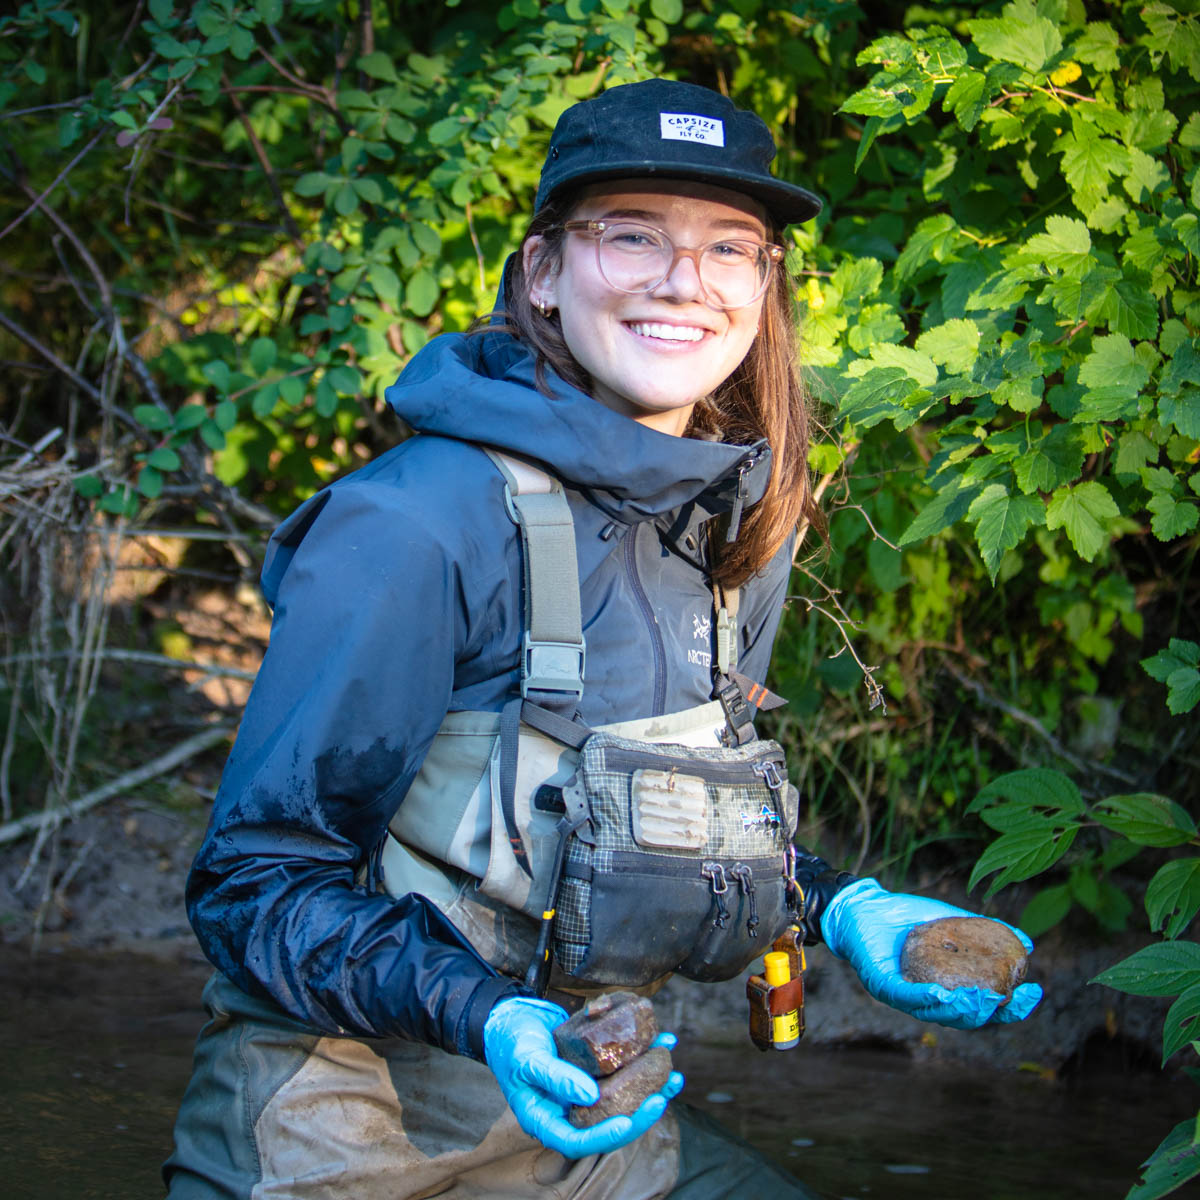 U of Guelph Environmental Sciences + Toxicology PhD candidate Moira Ijzerman at a river site